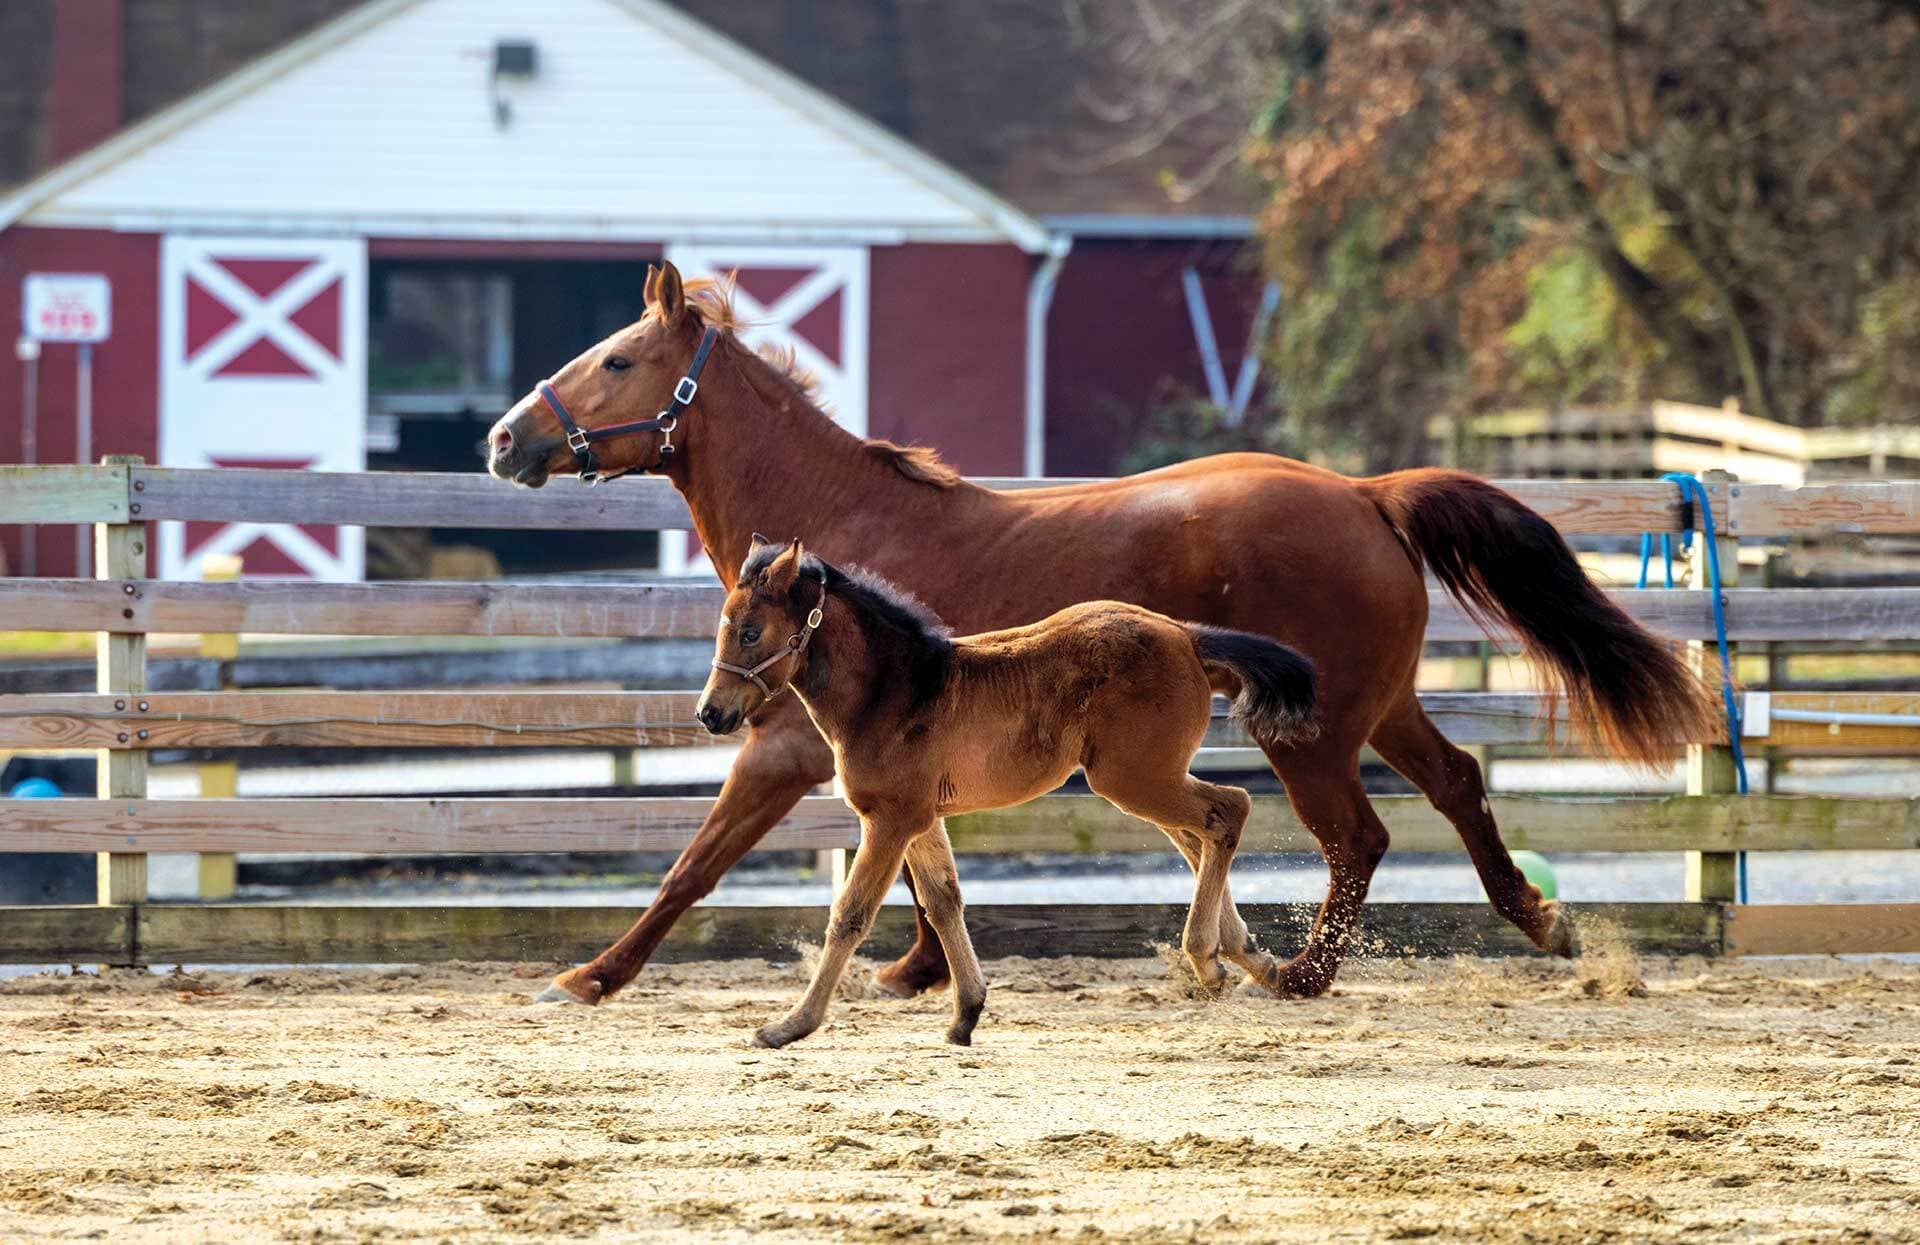 A brown mother horse and foal run in an enclosure